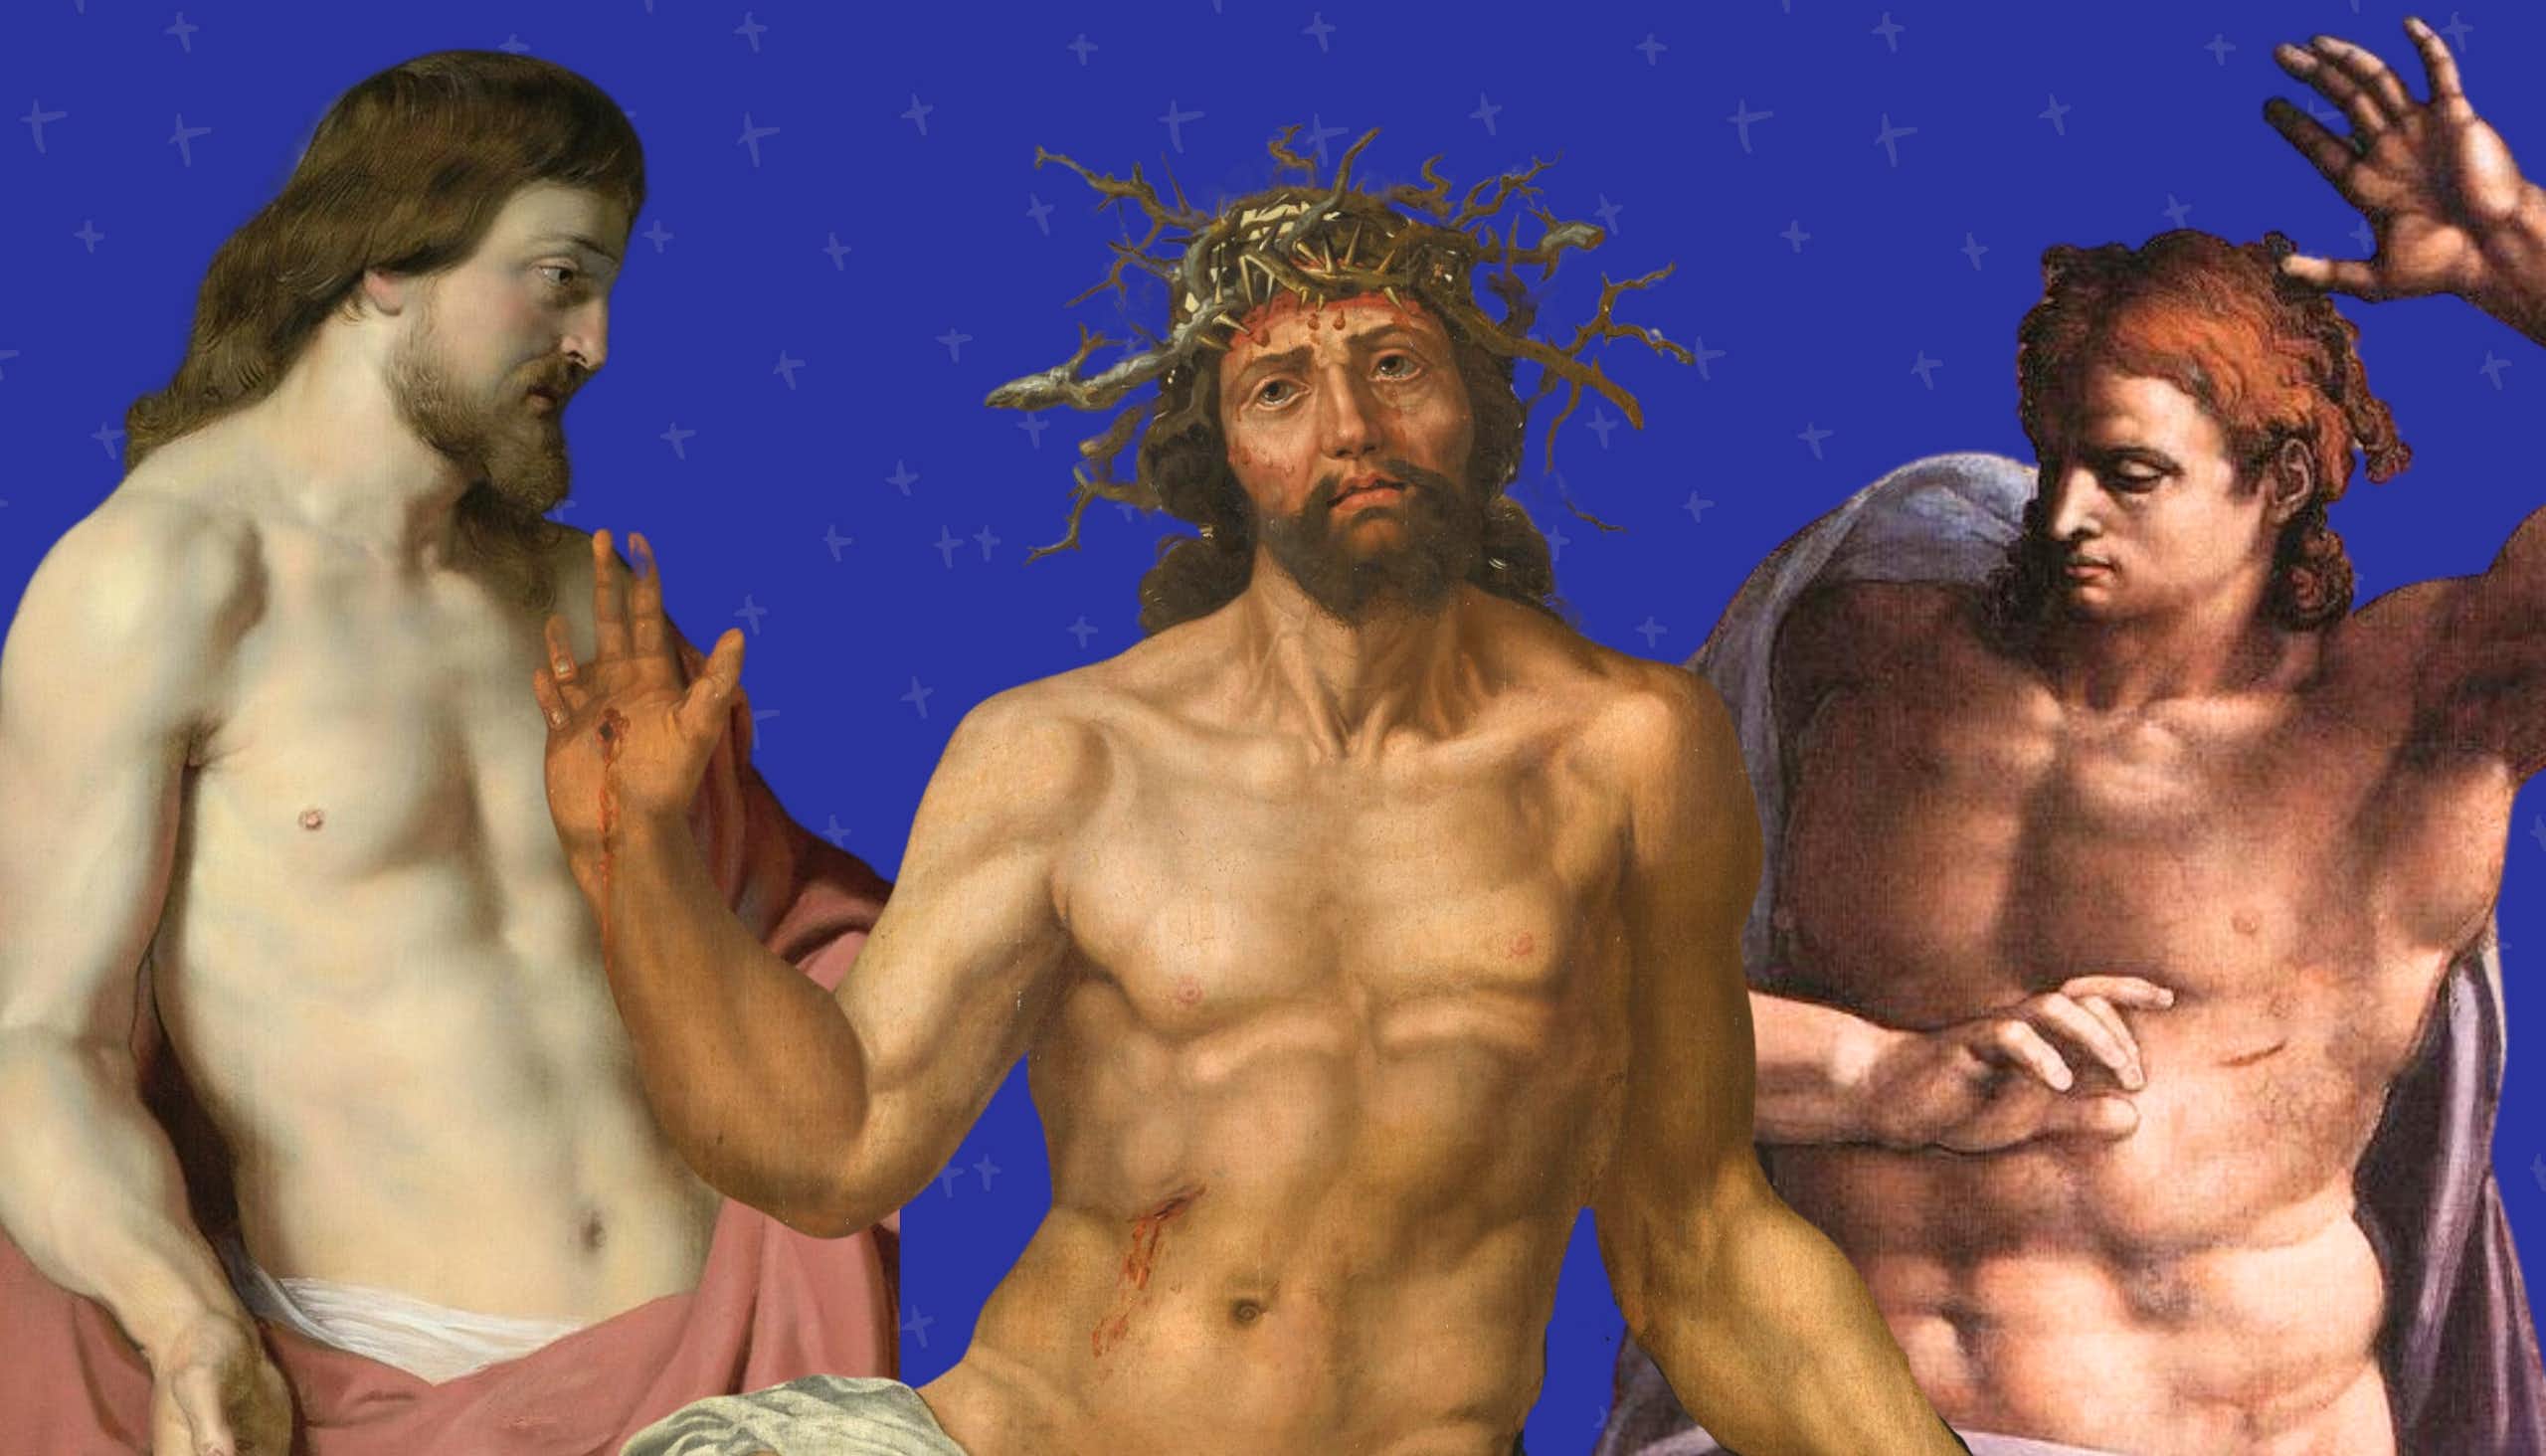 Three paintings of Jesus, each showing him with a six pack